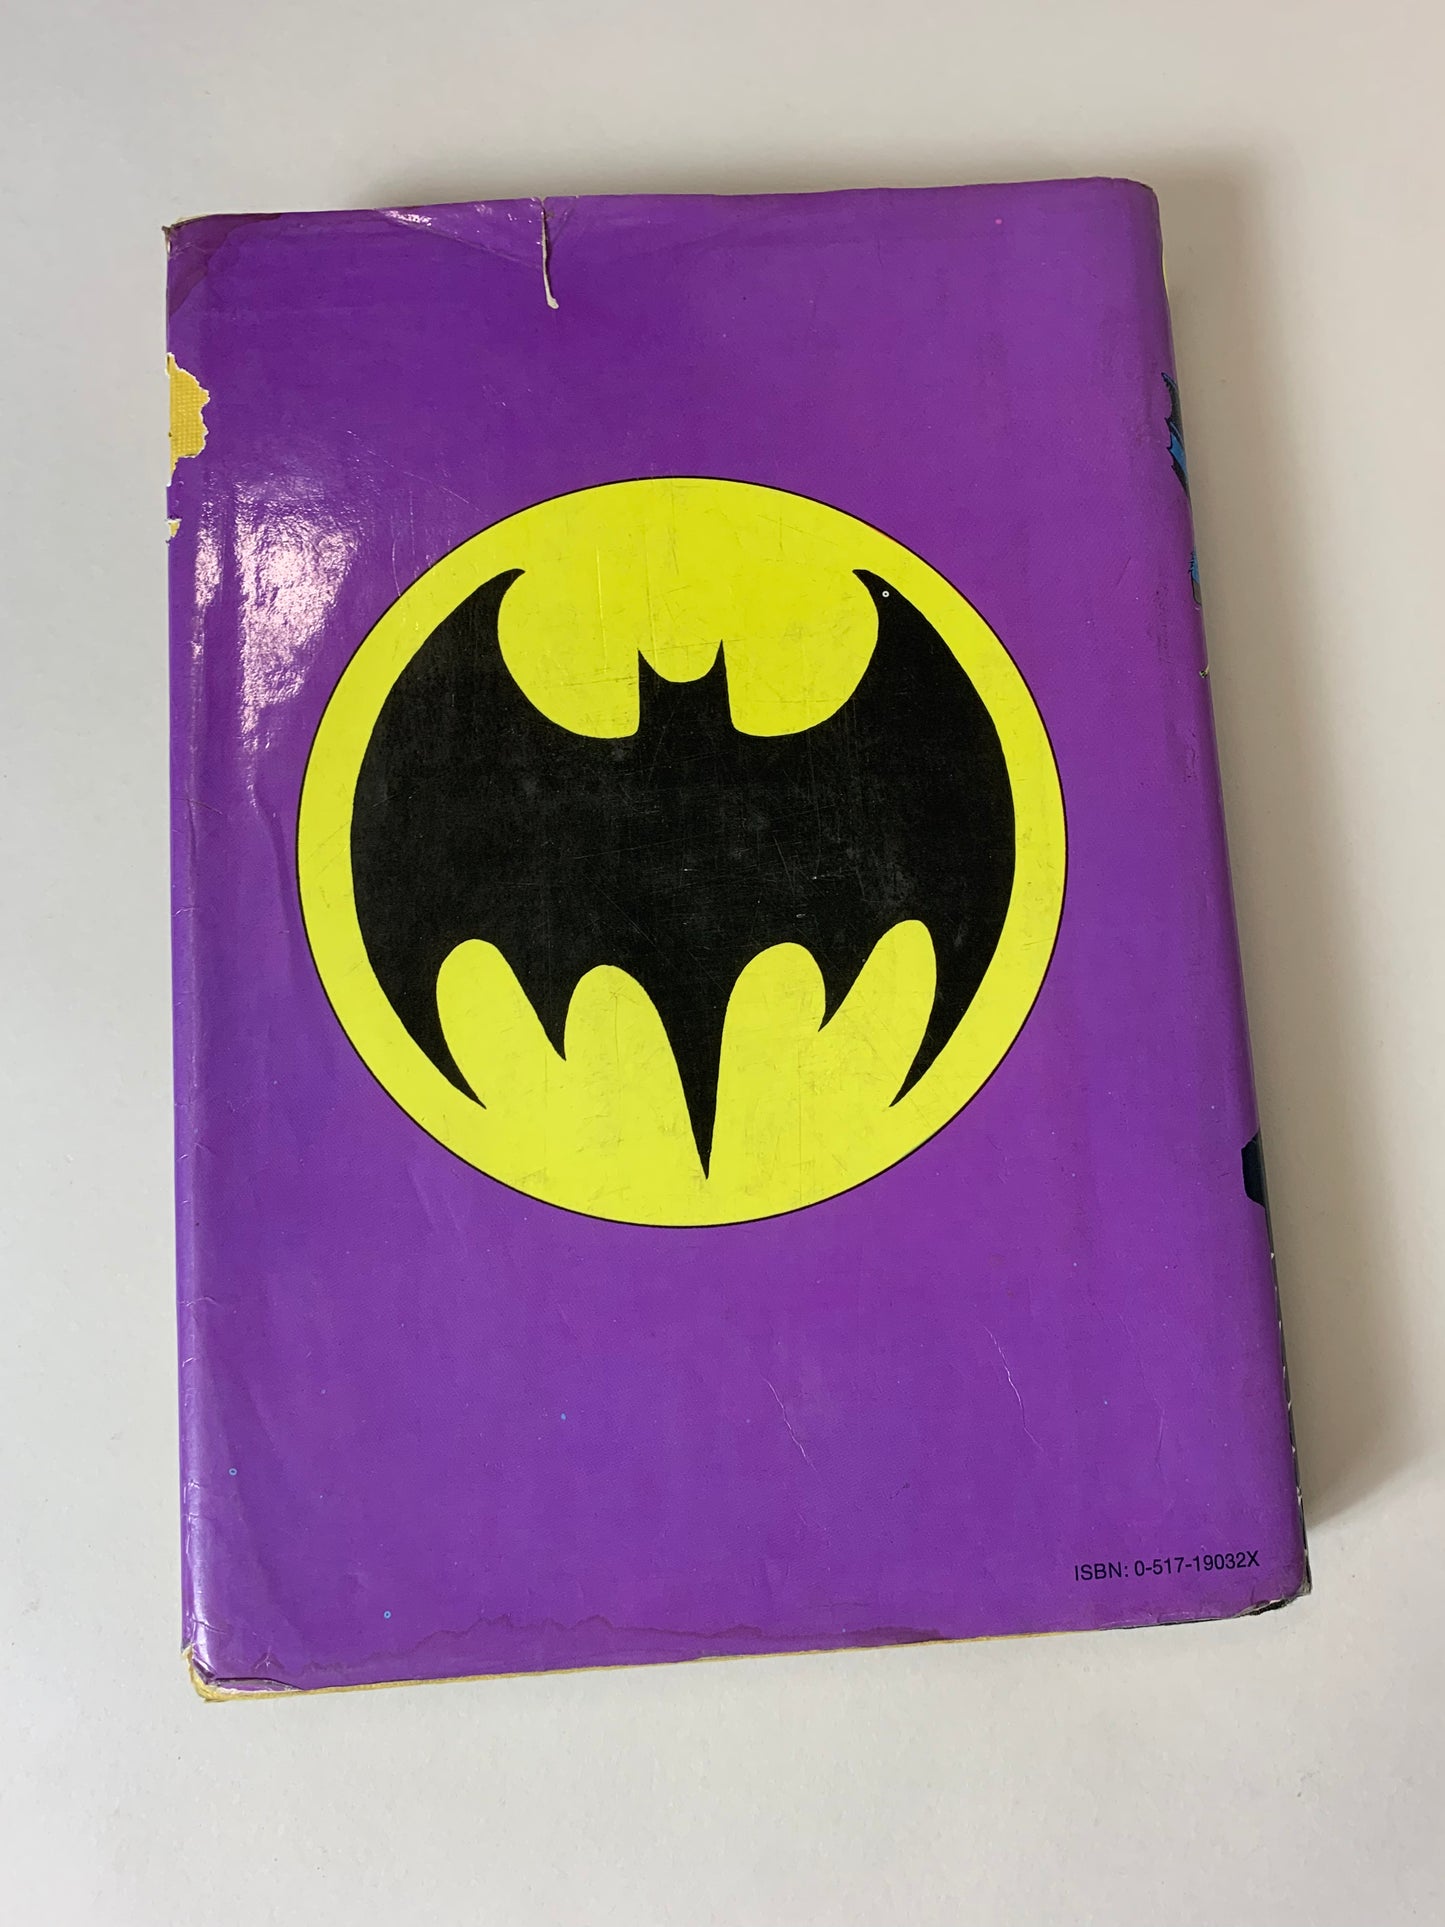 Batman: From the 30's To The 70's Vintage Book